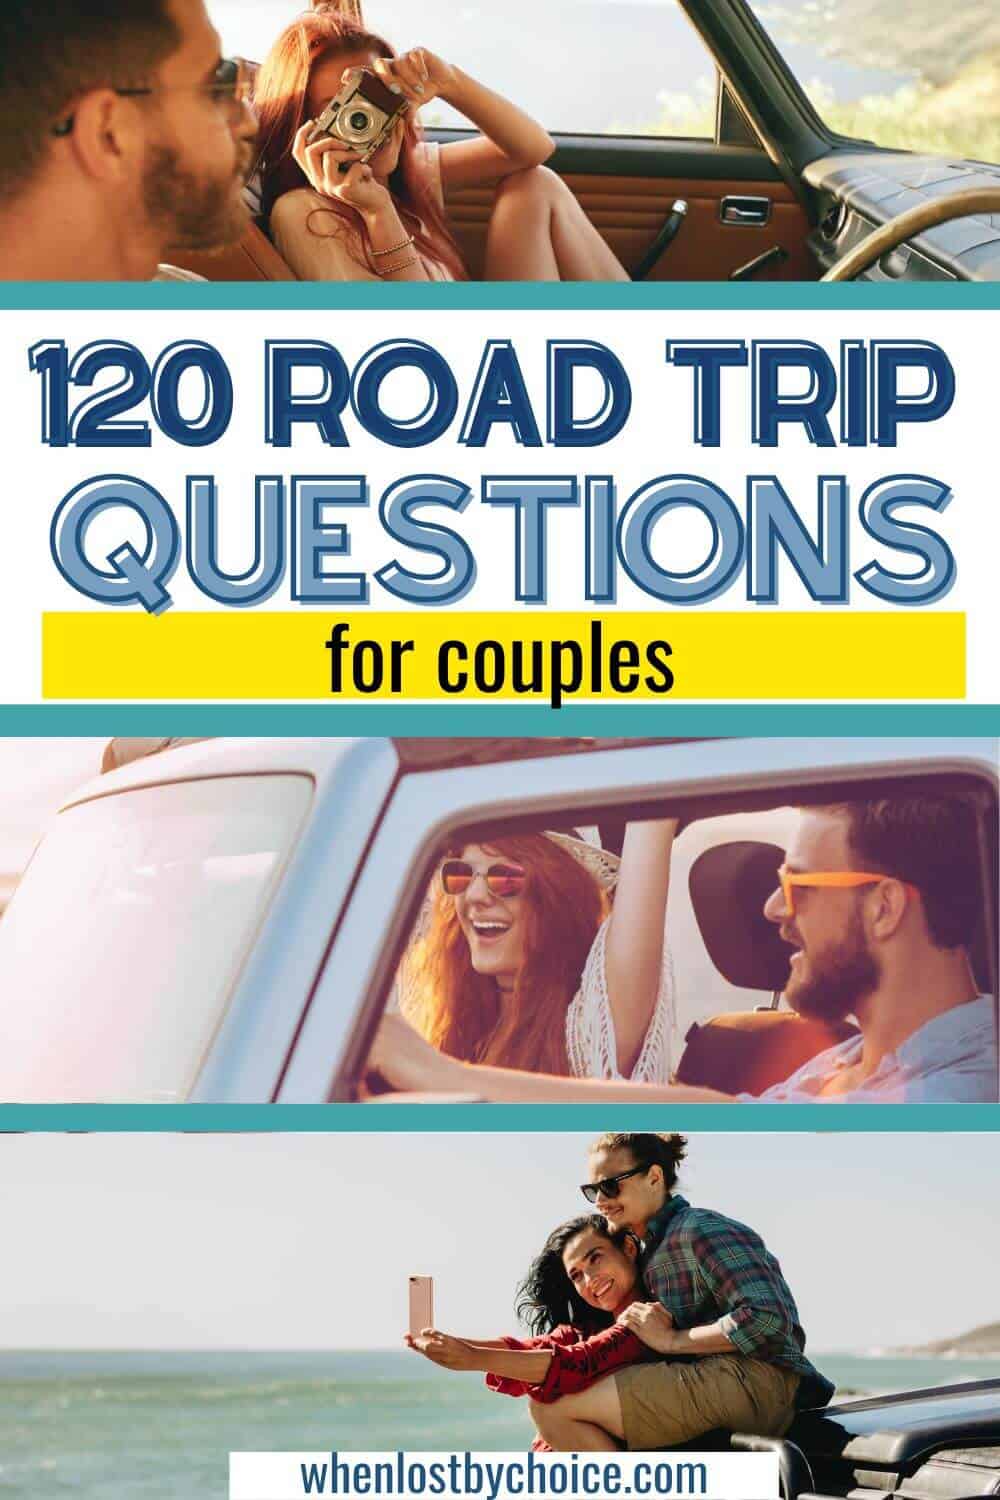 pinterest image - text reads 120 road trip questions for couples 